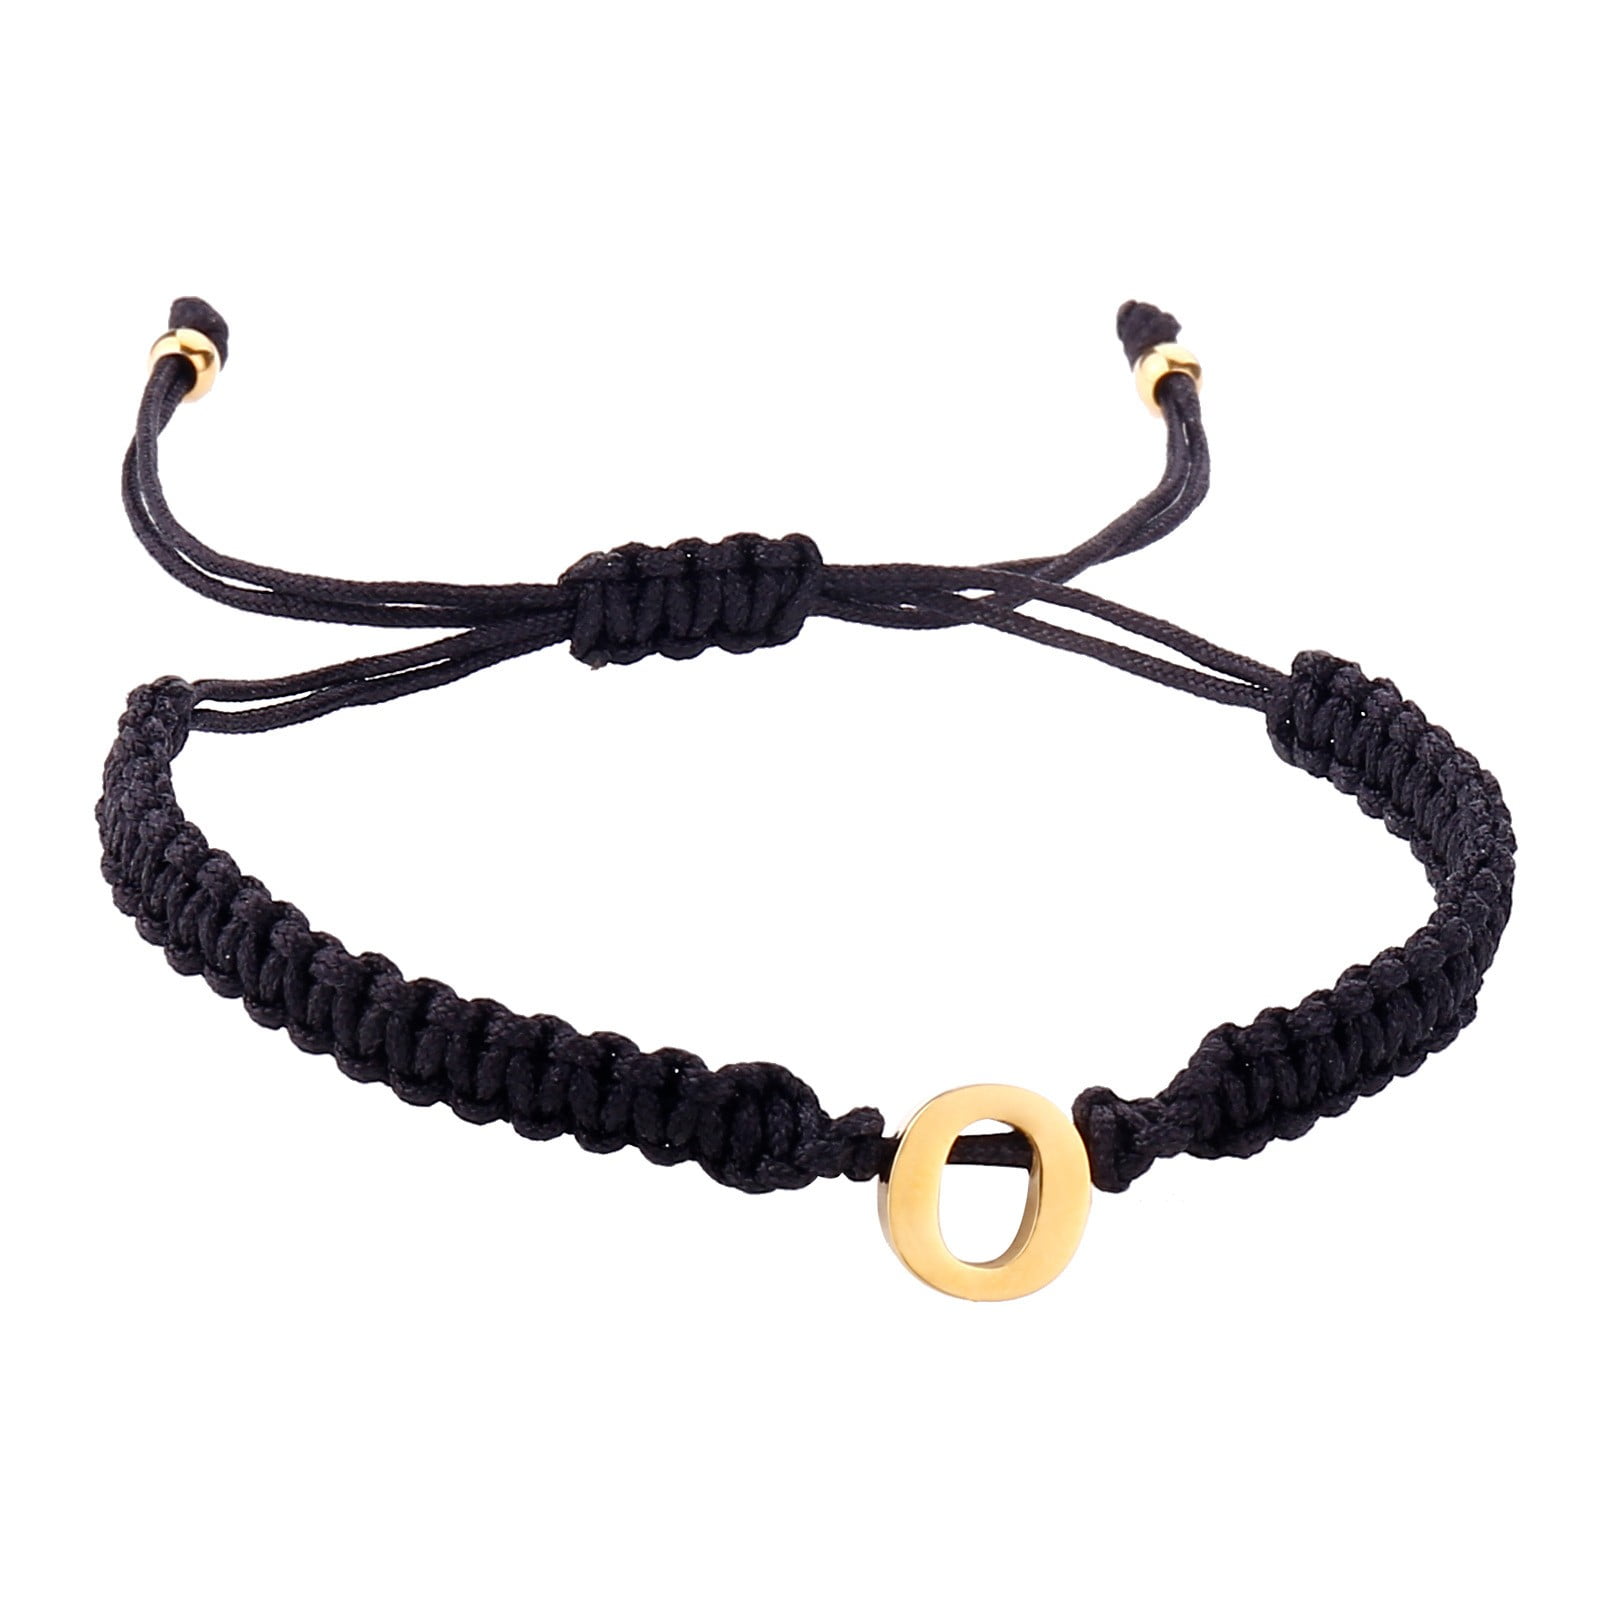 Personalized 26 Initial Bracelet Gold Plated Letter Black Woven Bracelet  Charm Bracelet Woven Bracelet For Men Women Girls Jr1487 Teen Watches for